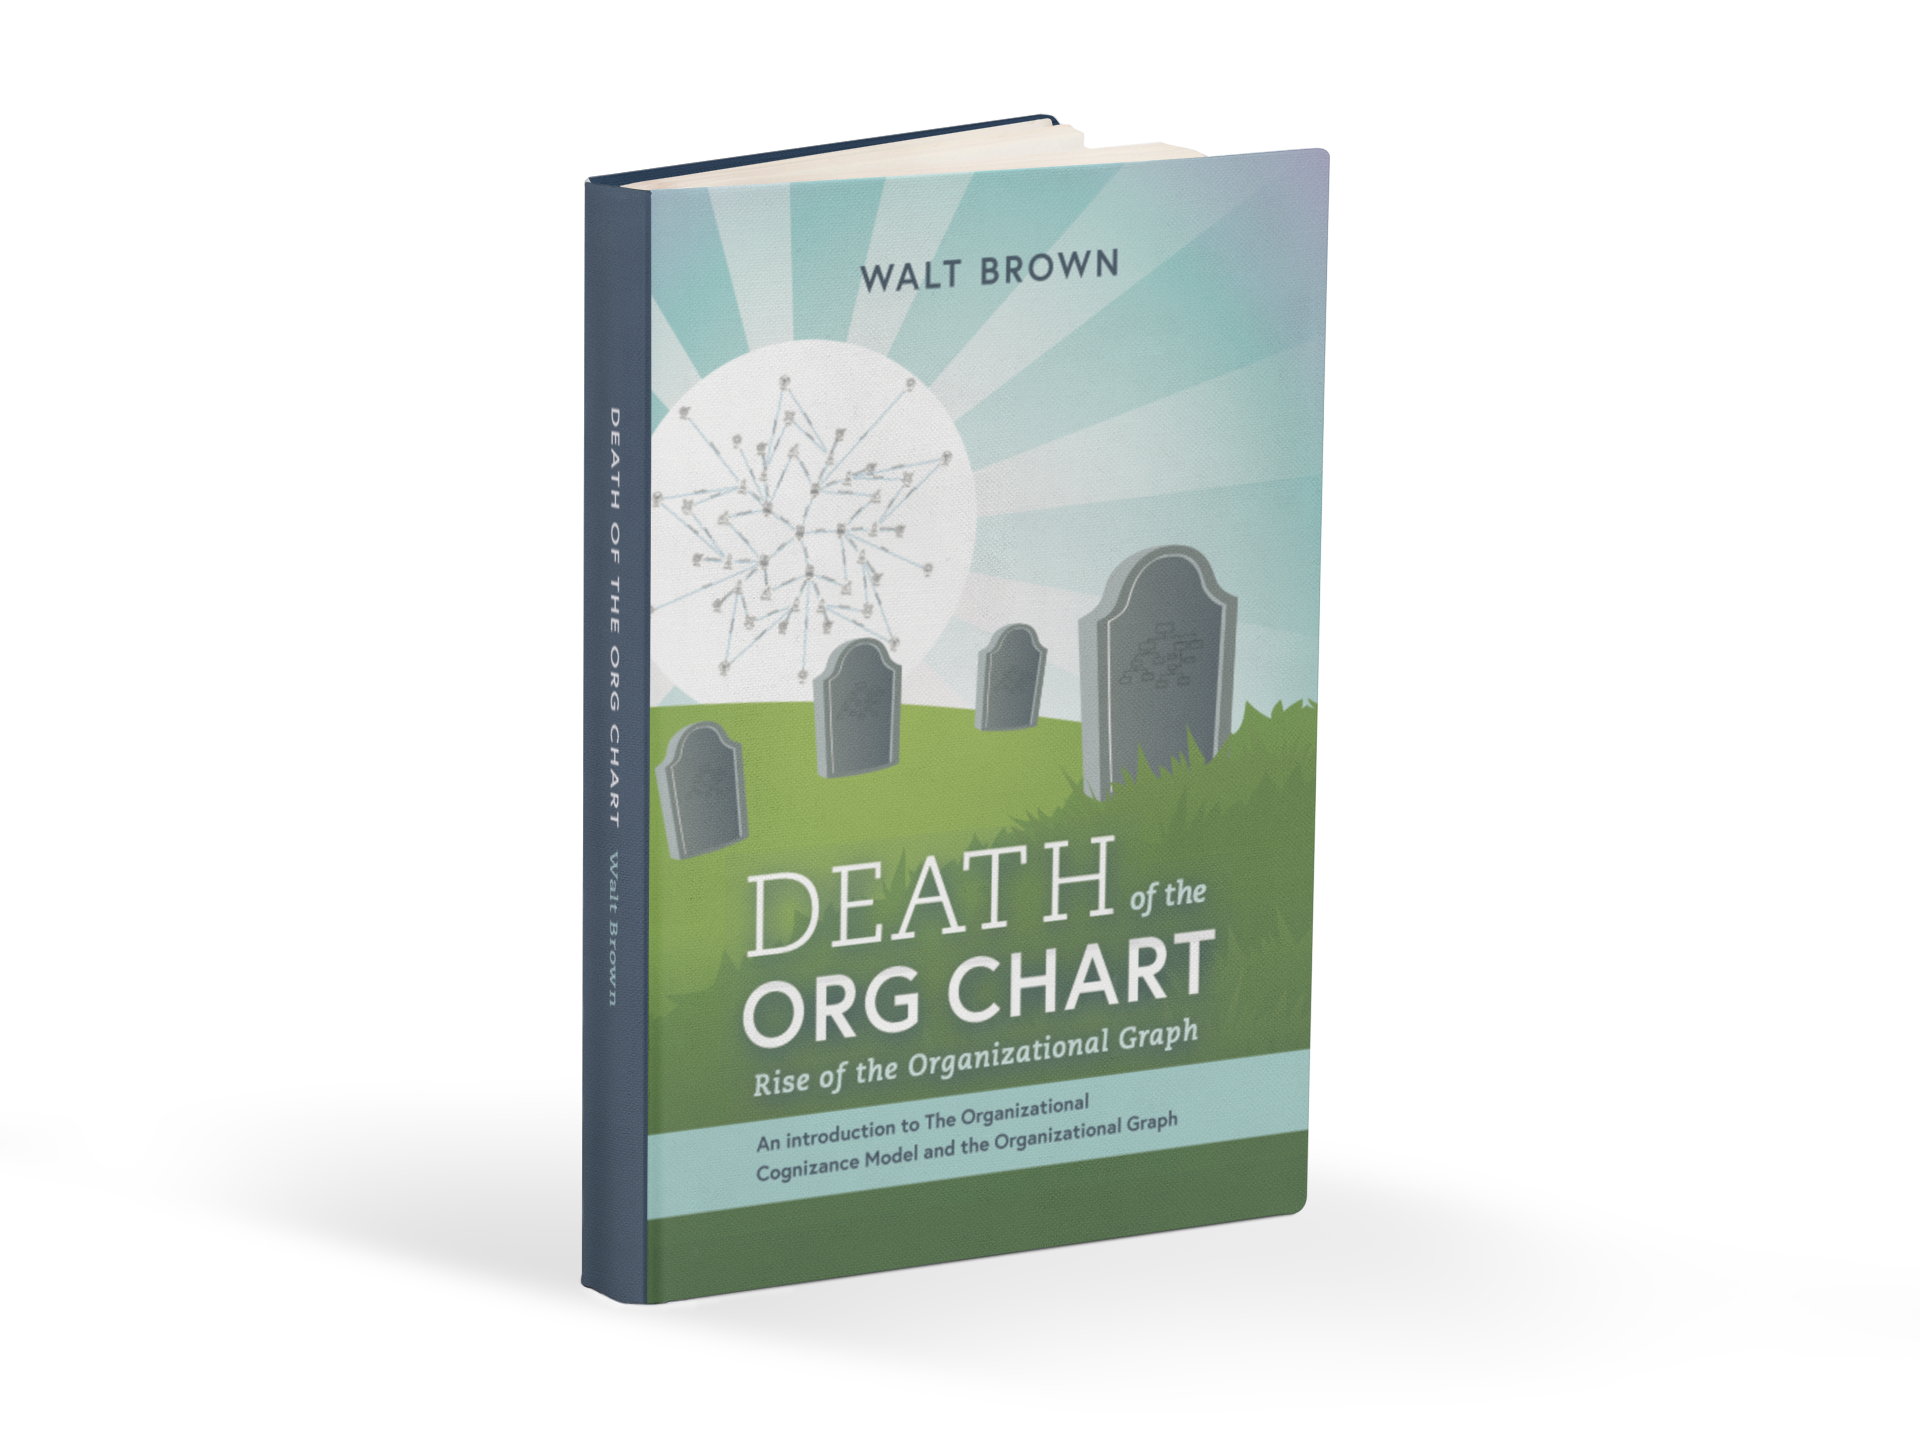 Image of the cover of the book death of the org chart showing headstones that represent org charts dying and a sun showing org graphsr . rts 